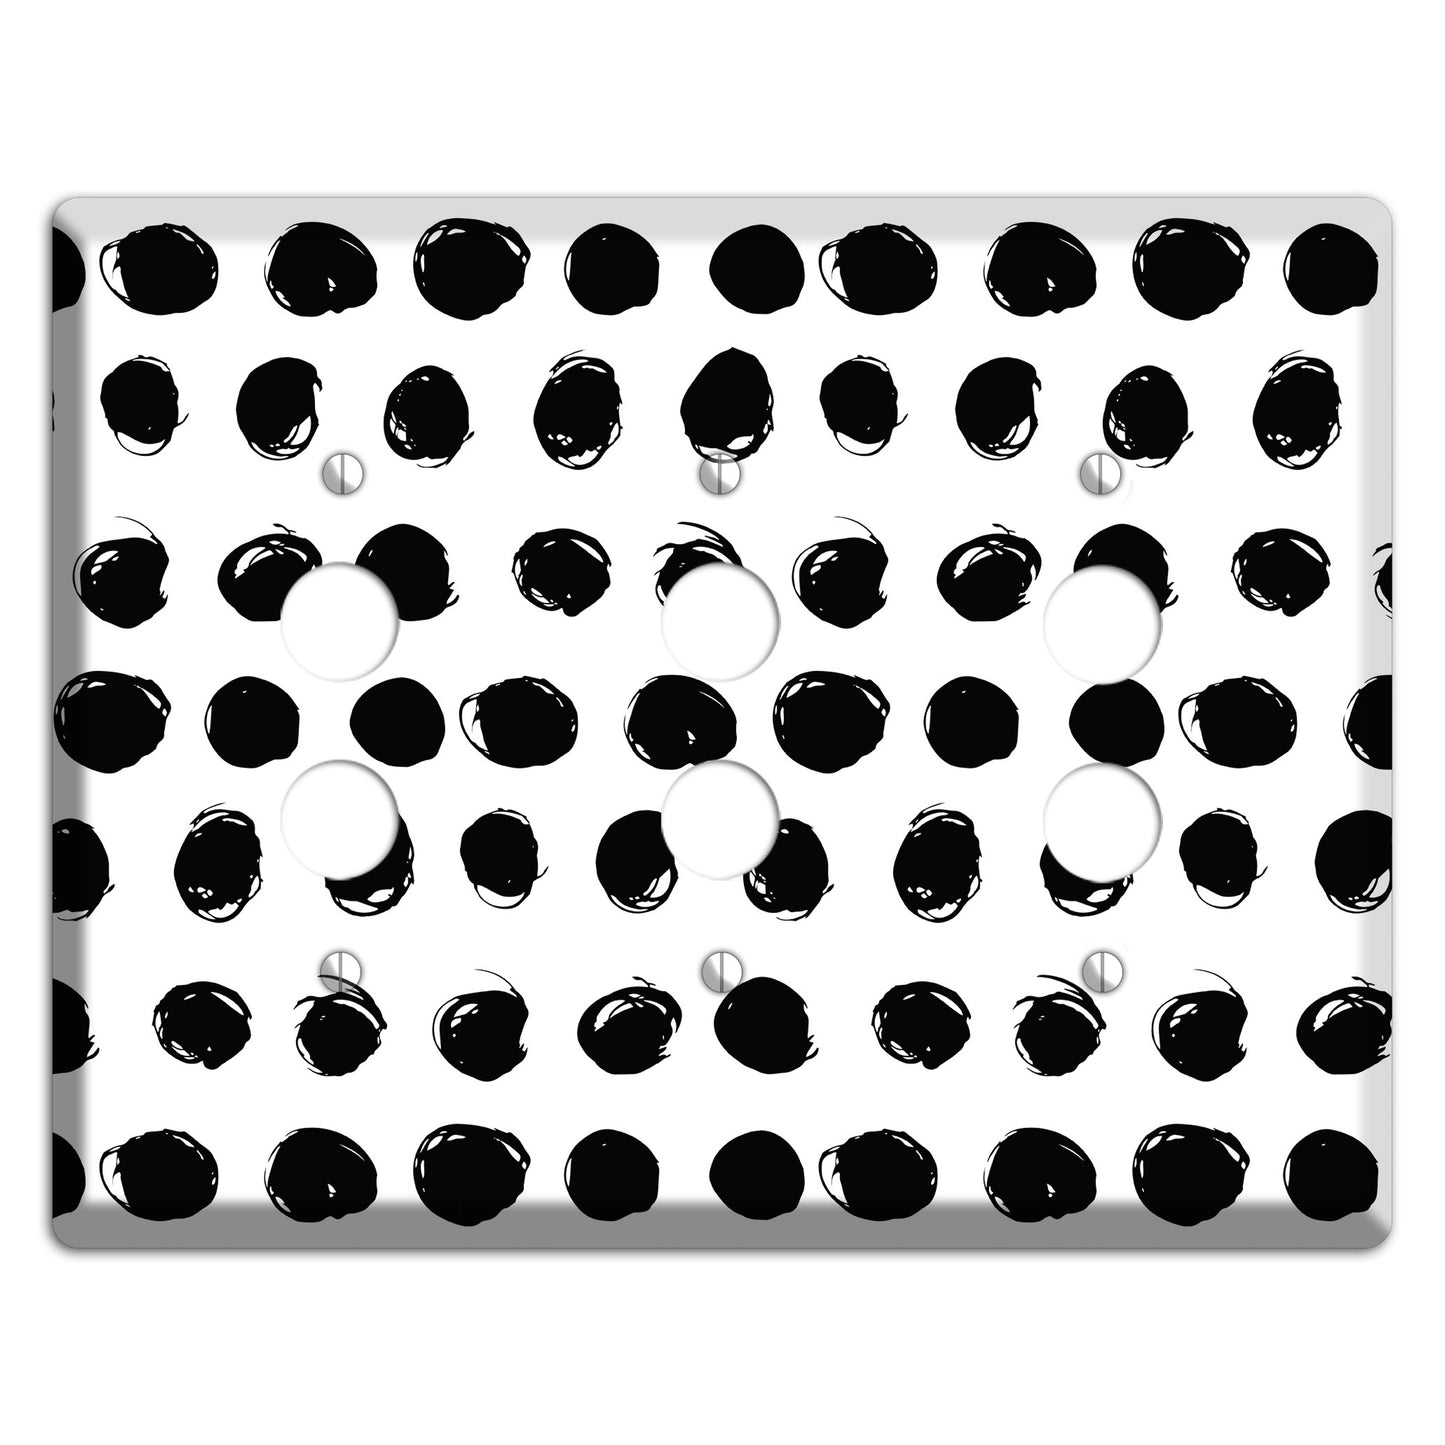 Ink Drops 9 3 Pushbutton Wallplate